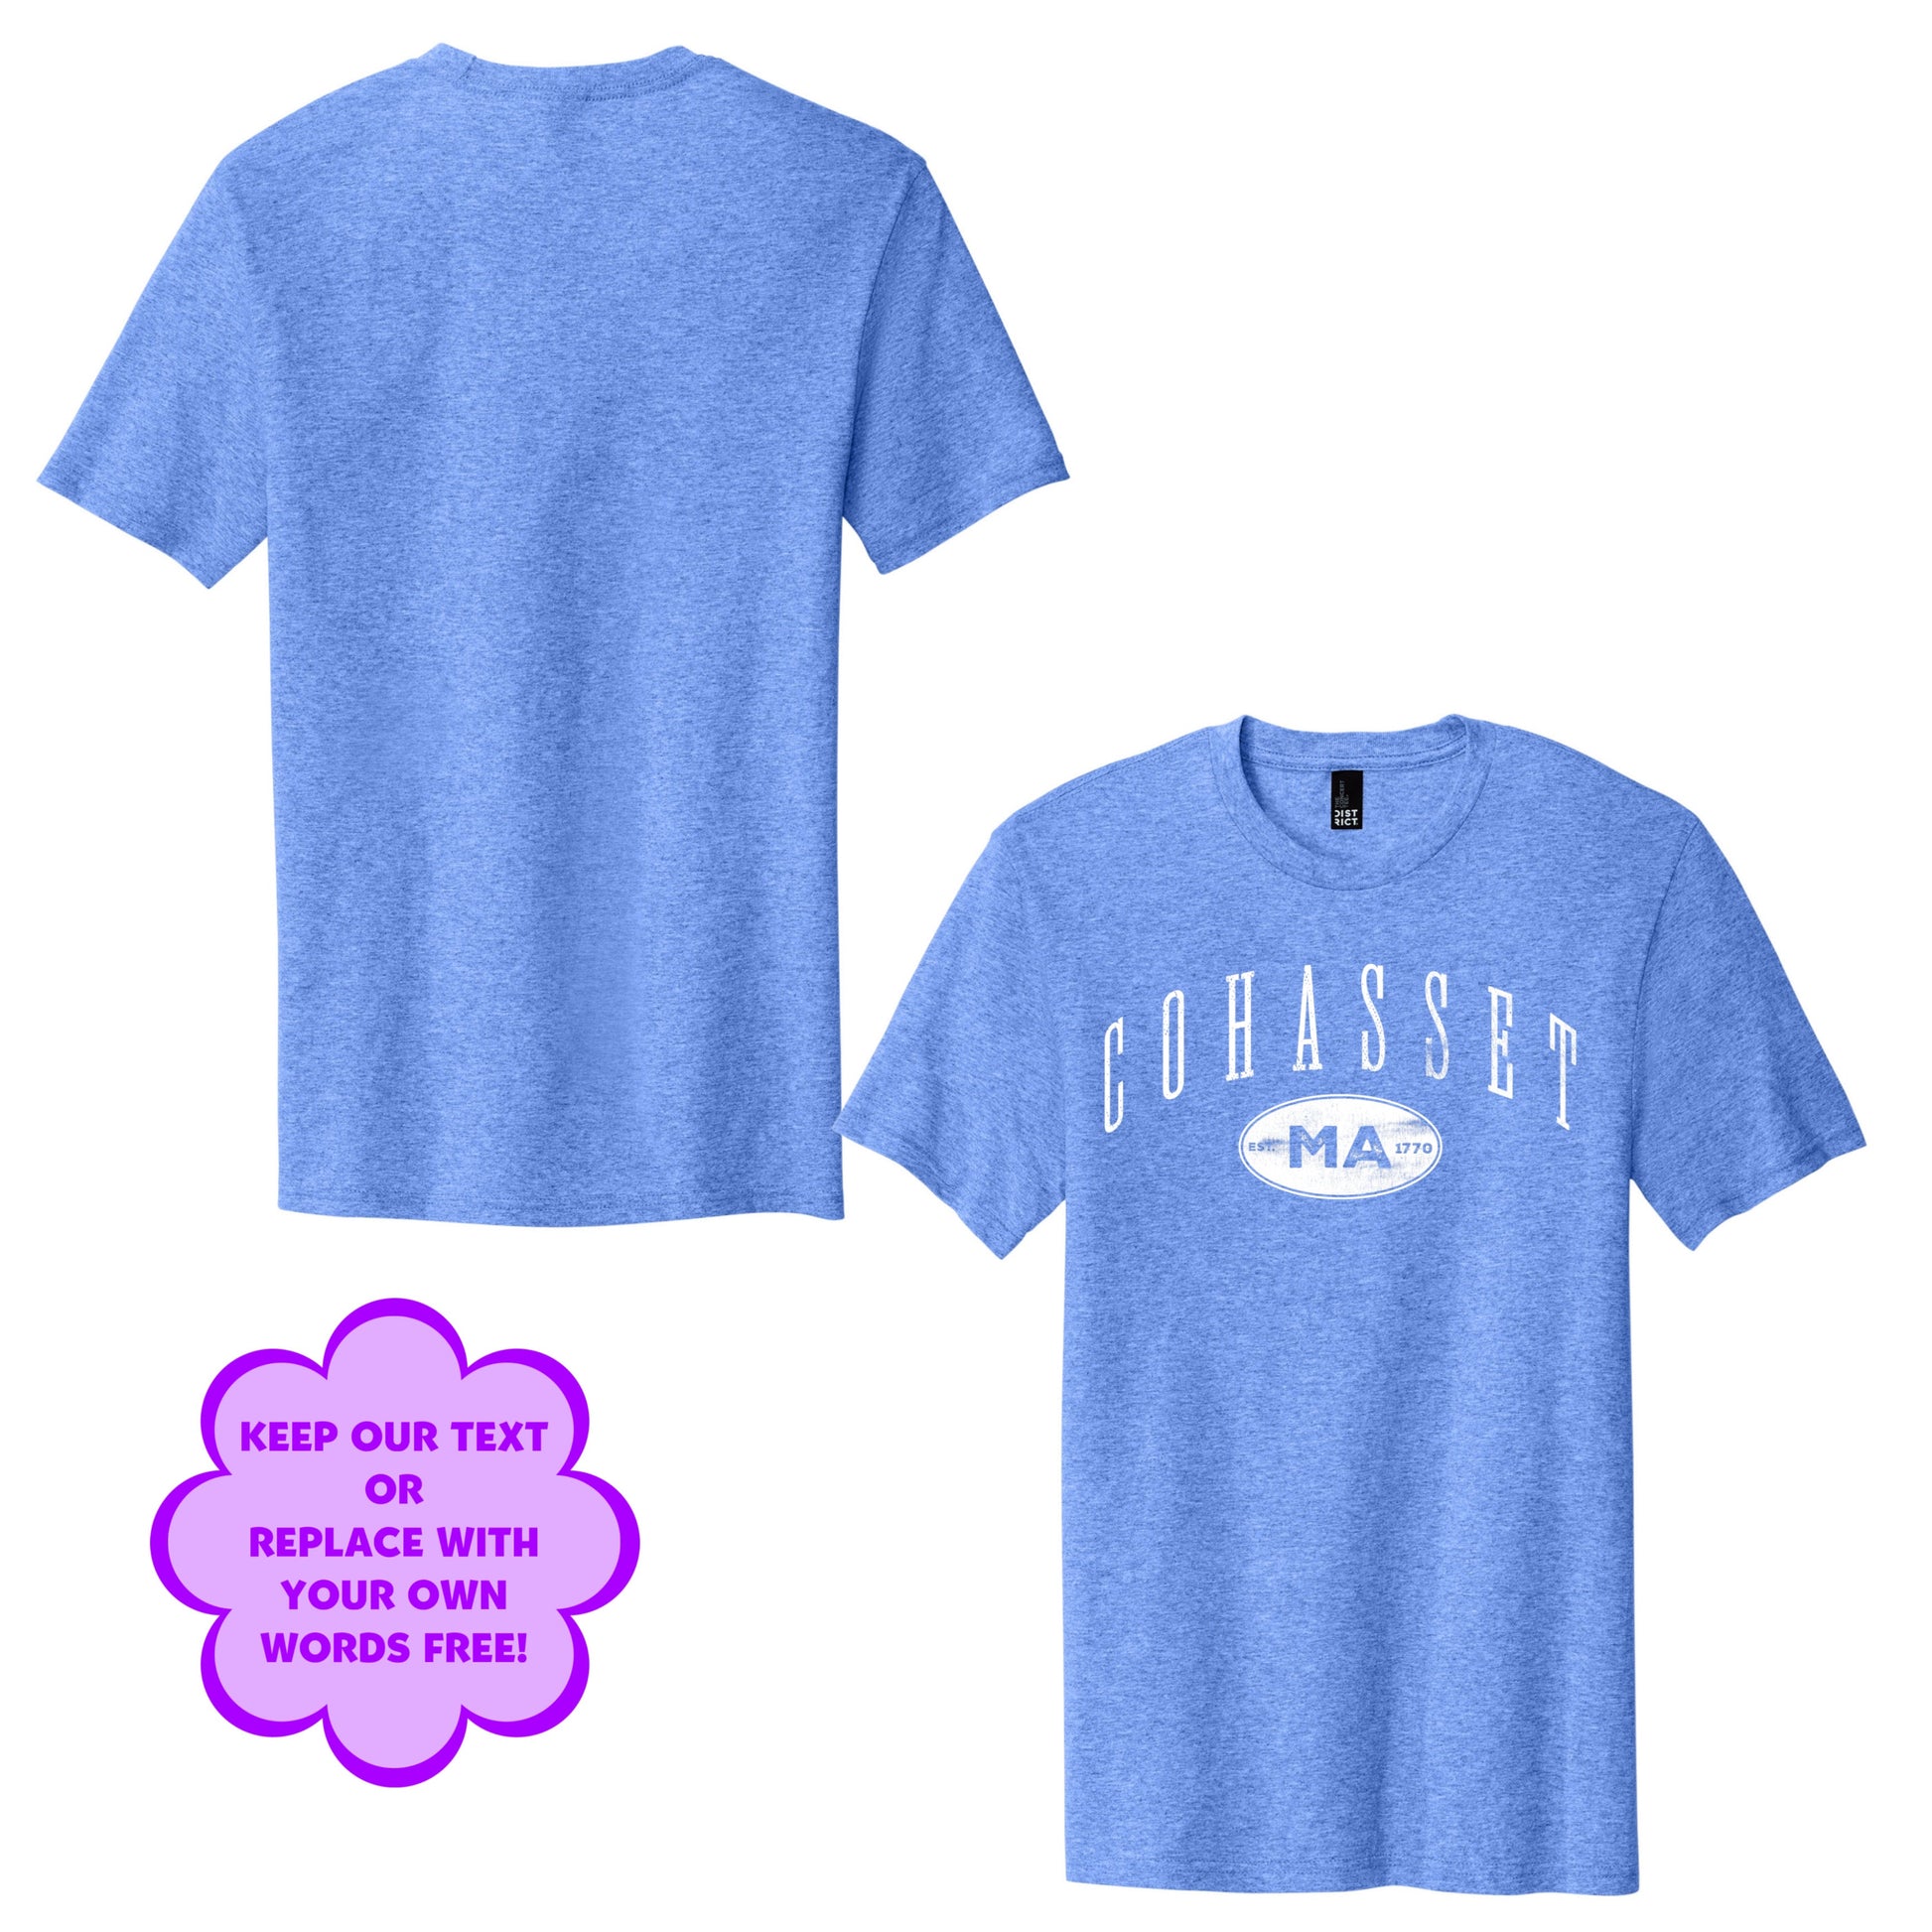 Personalize Free Cohasset MA, Kids Cotton Tees from Baby Squid Ink 